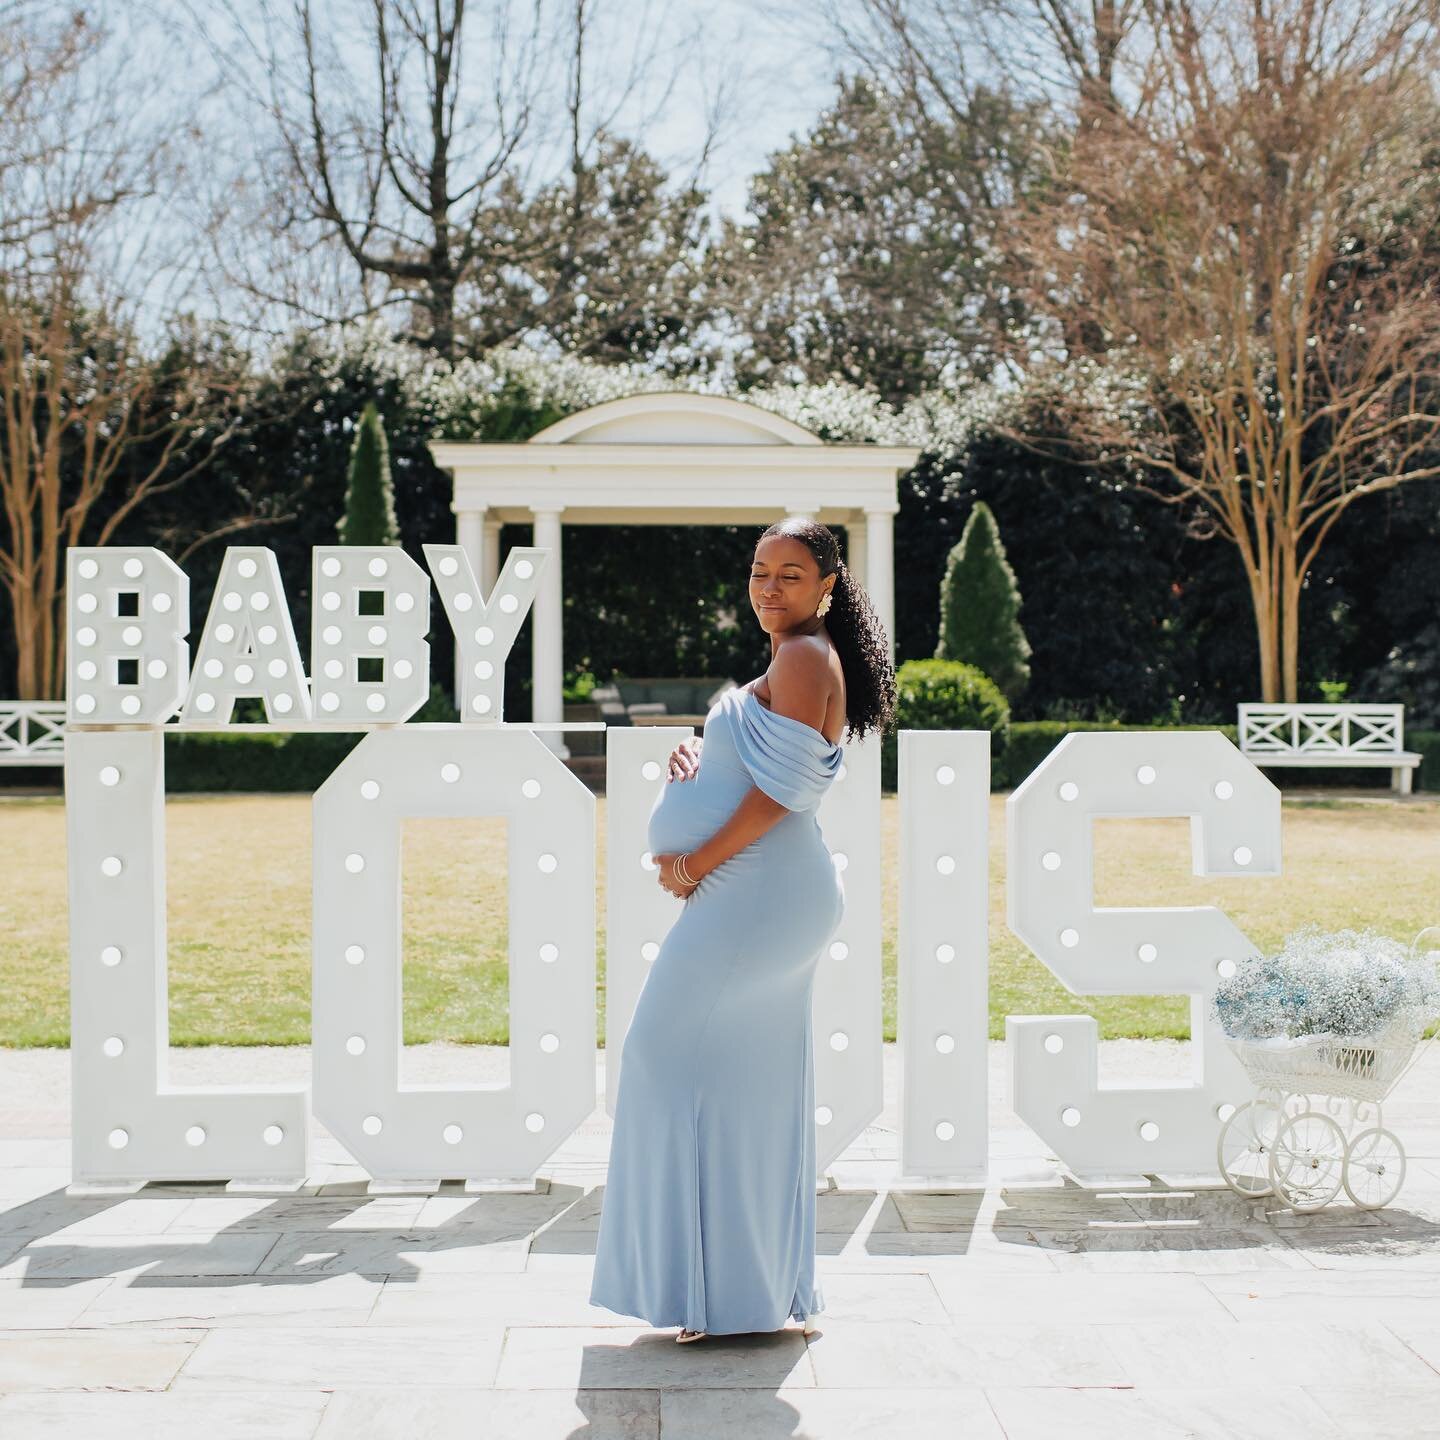 Our baby boy is on the way soon 💙💙 We thank all of our family and friends who came to the baby shower and continue to support us @simplycolette_. We love you all ❤️❤️ 
.
.
Photos by @allisonclaireimagery 
Location @dukemansion